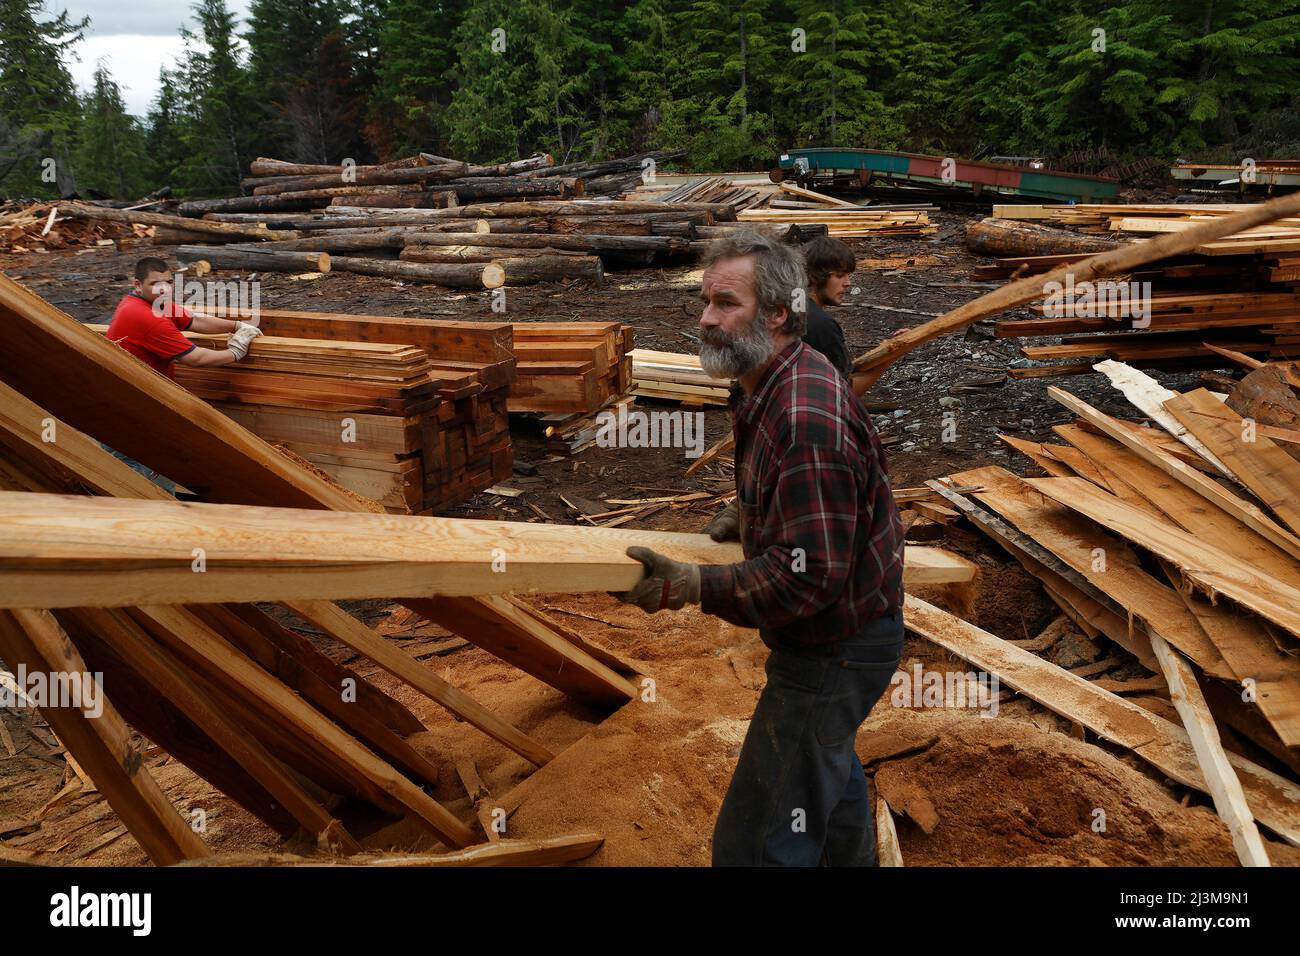 Timber is cut into cedar shakes and lumber for building and construction creating jobs for locals at a small sawmill operation on Prince of Wales I... Stock Photo